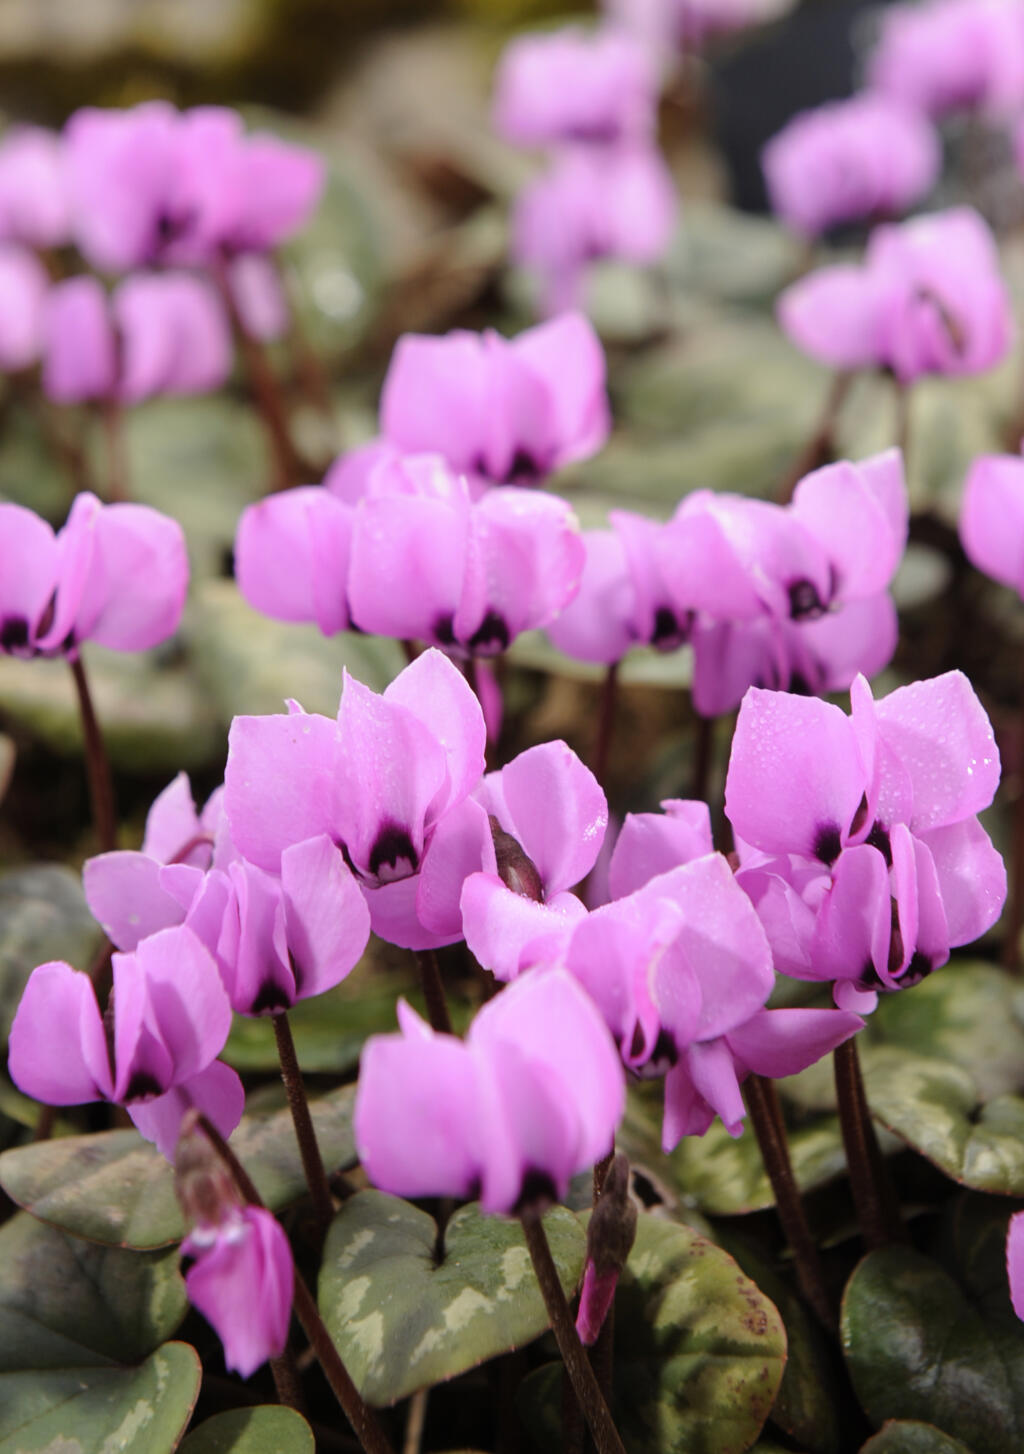 It’s not hard to propagate cyclamen but watch out for mites.   (AP Photo/Winfried Rothermel)